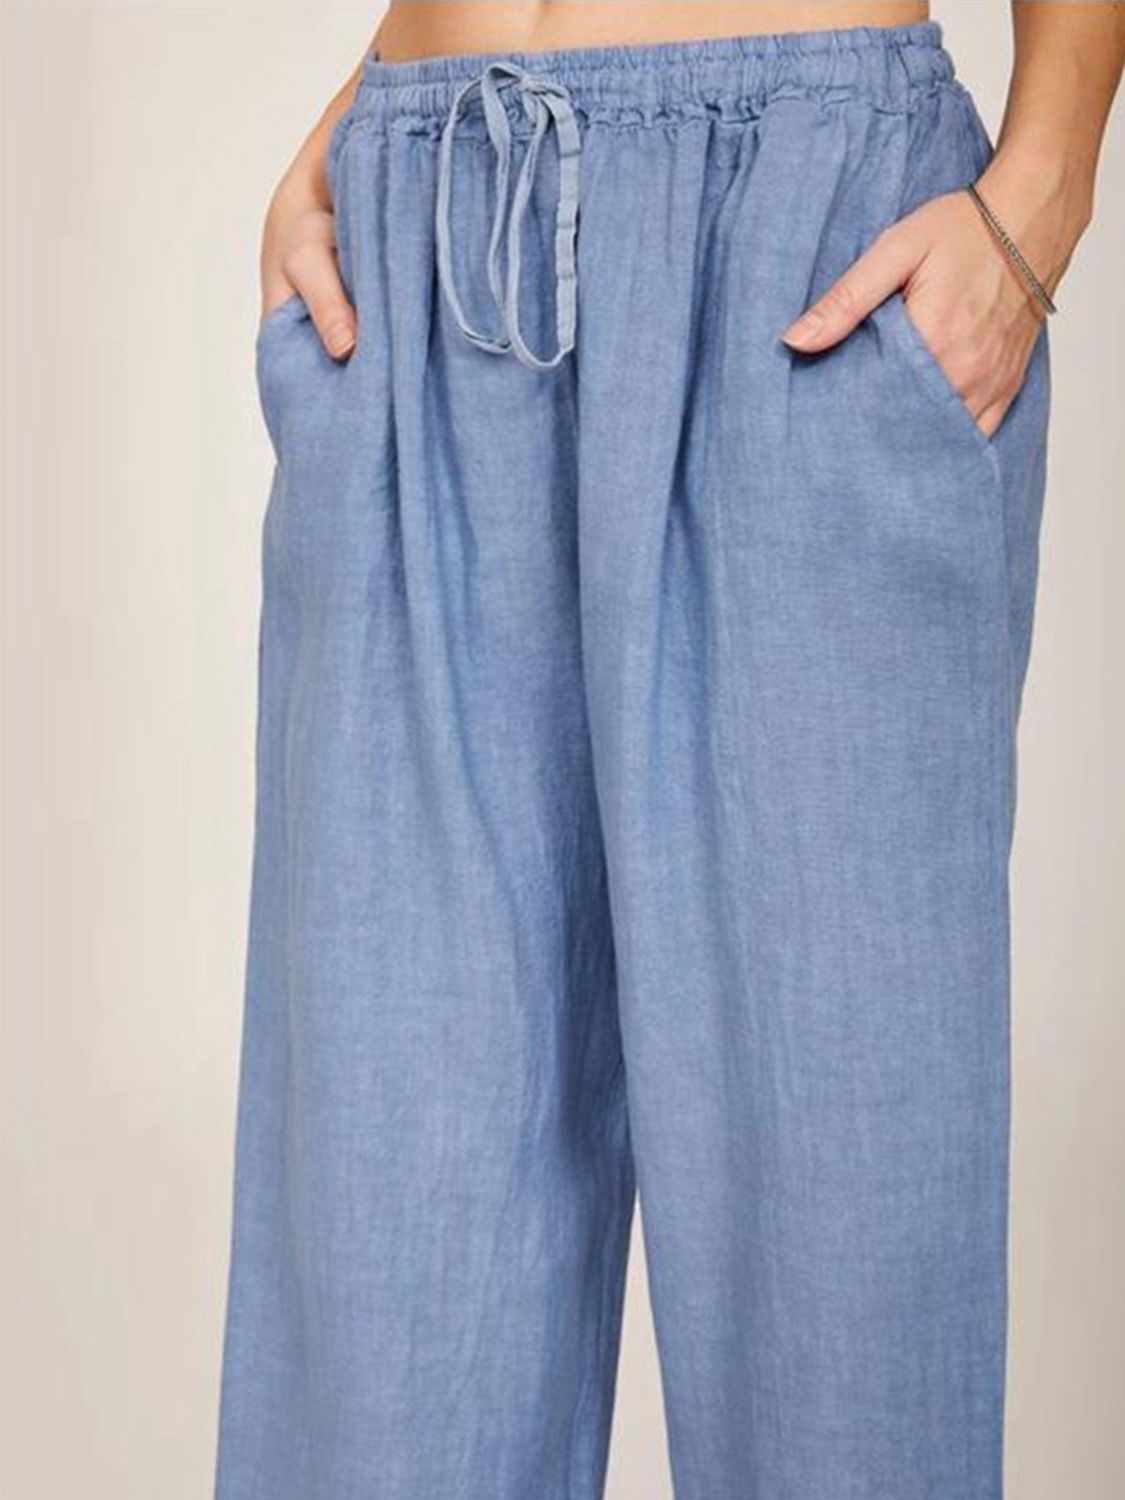 Light Slate Gray Full Size Long Pants Sentient Beauty Fashions Apparel & Accessories